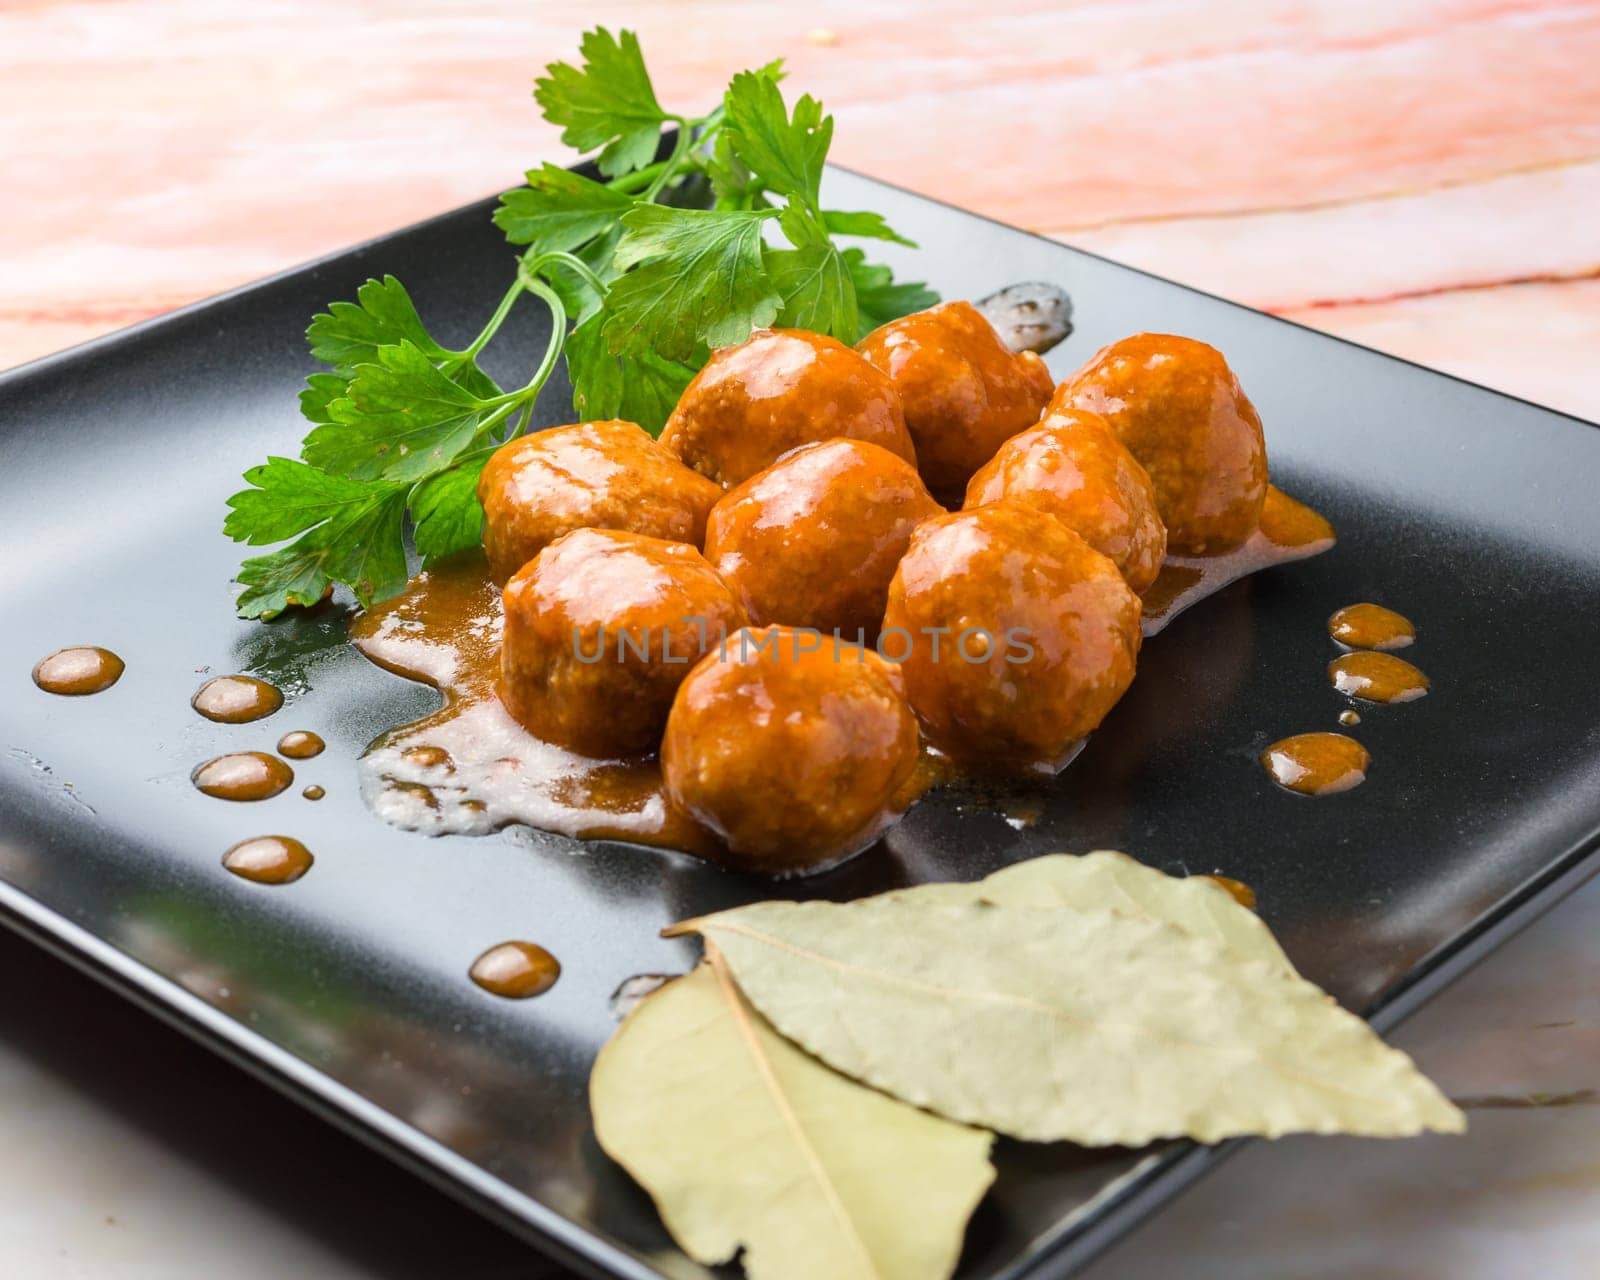 Glazed meatballs garnished with parsley and bay leaf on a black plate, typical food, typical mediterranean mallorcan cuisine typical from balearic islands mallorca, spain,